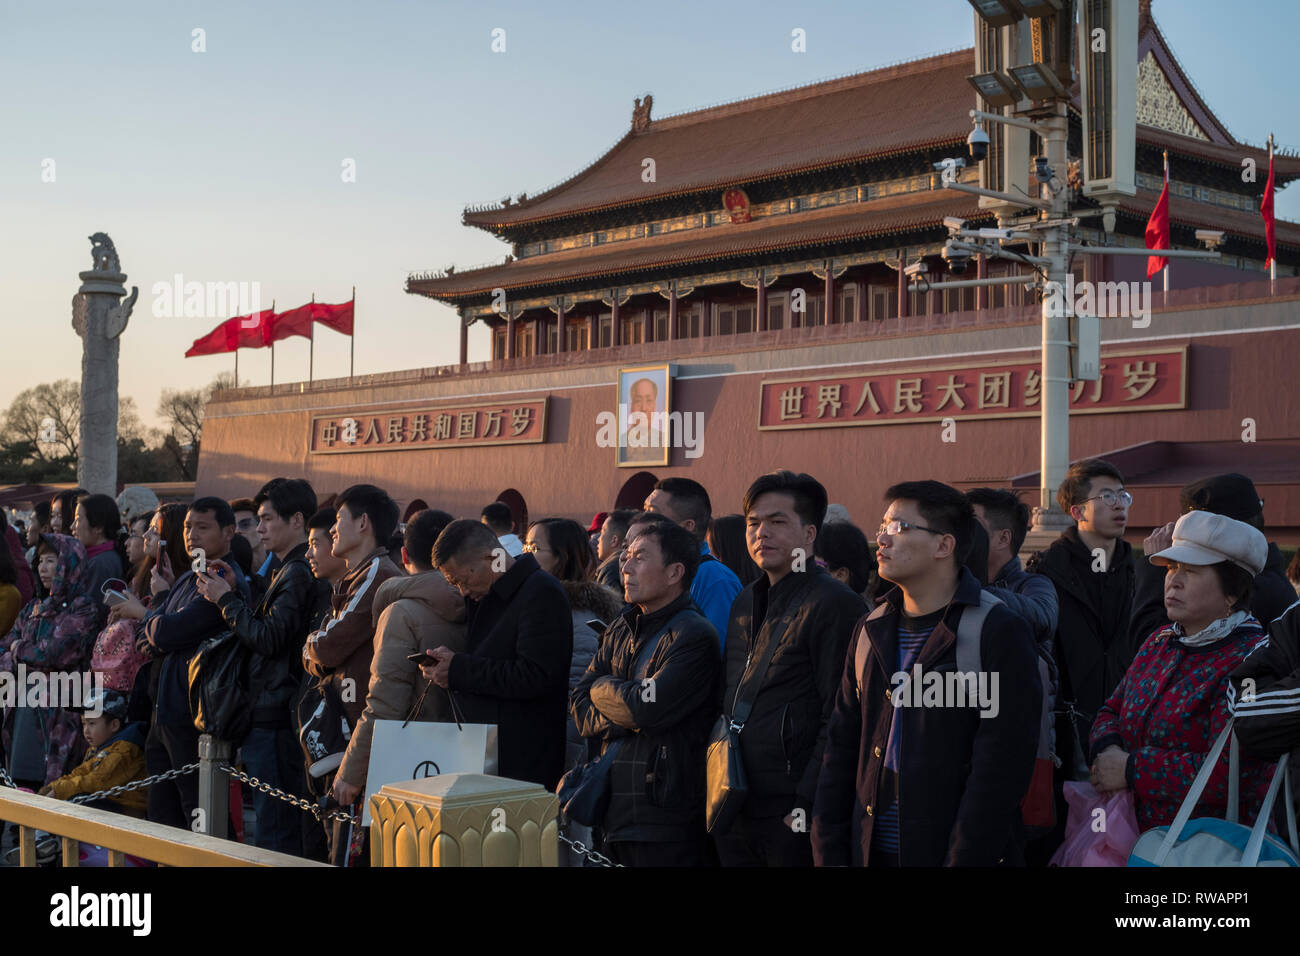 People gather to watch a flag-lowering ceremony in front of Tiananmen Gate in Beijing, China. 05-Mar-2019 Stock Photo